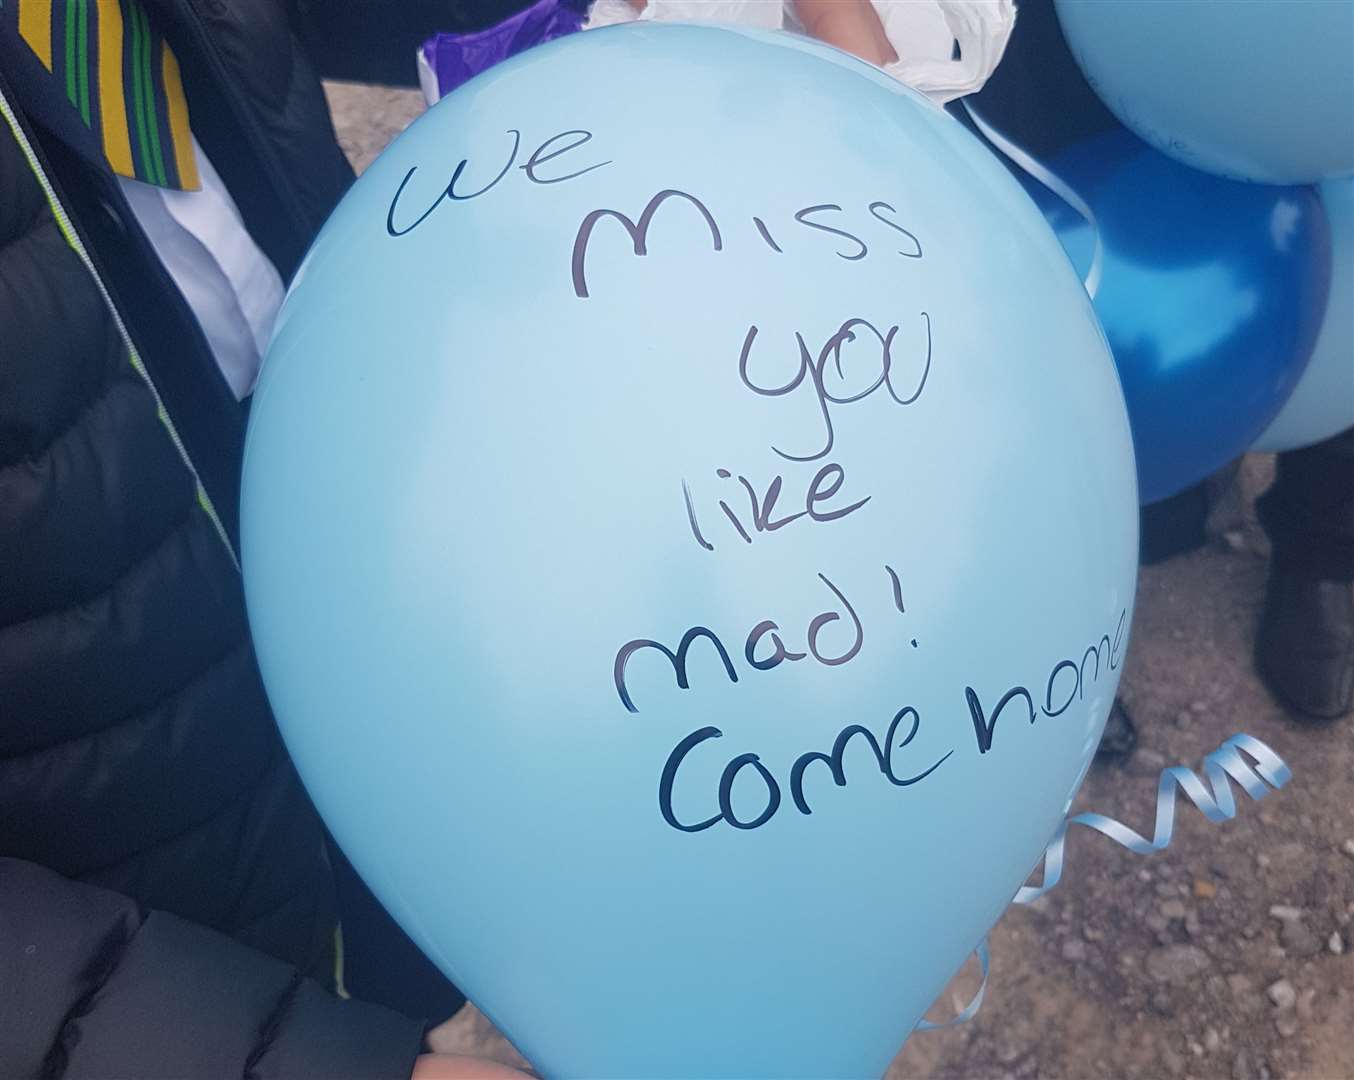 Students straight out of school wrote messages on the balloons before letting them go (16391118)